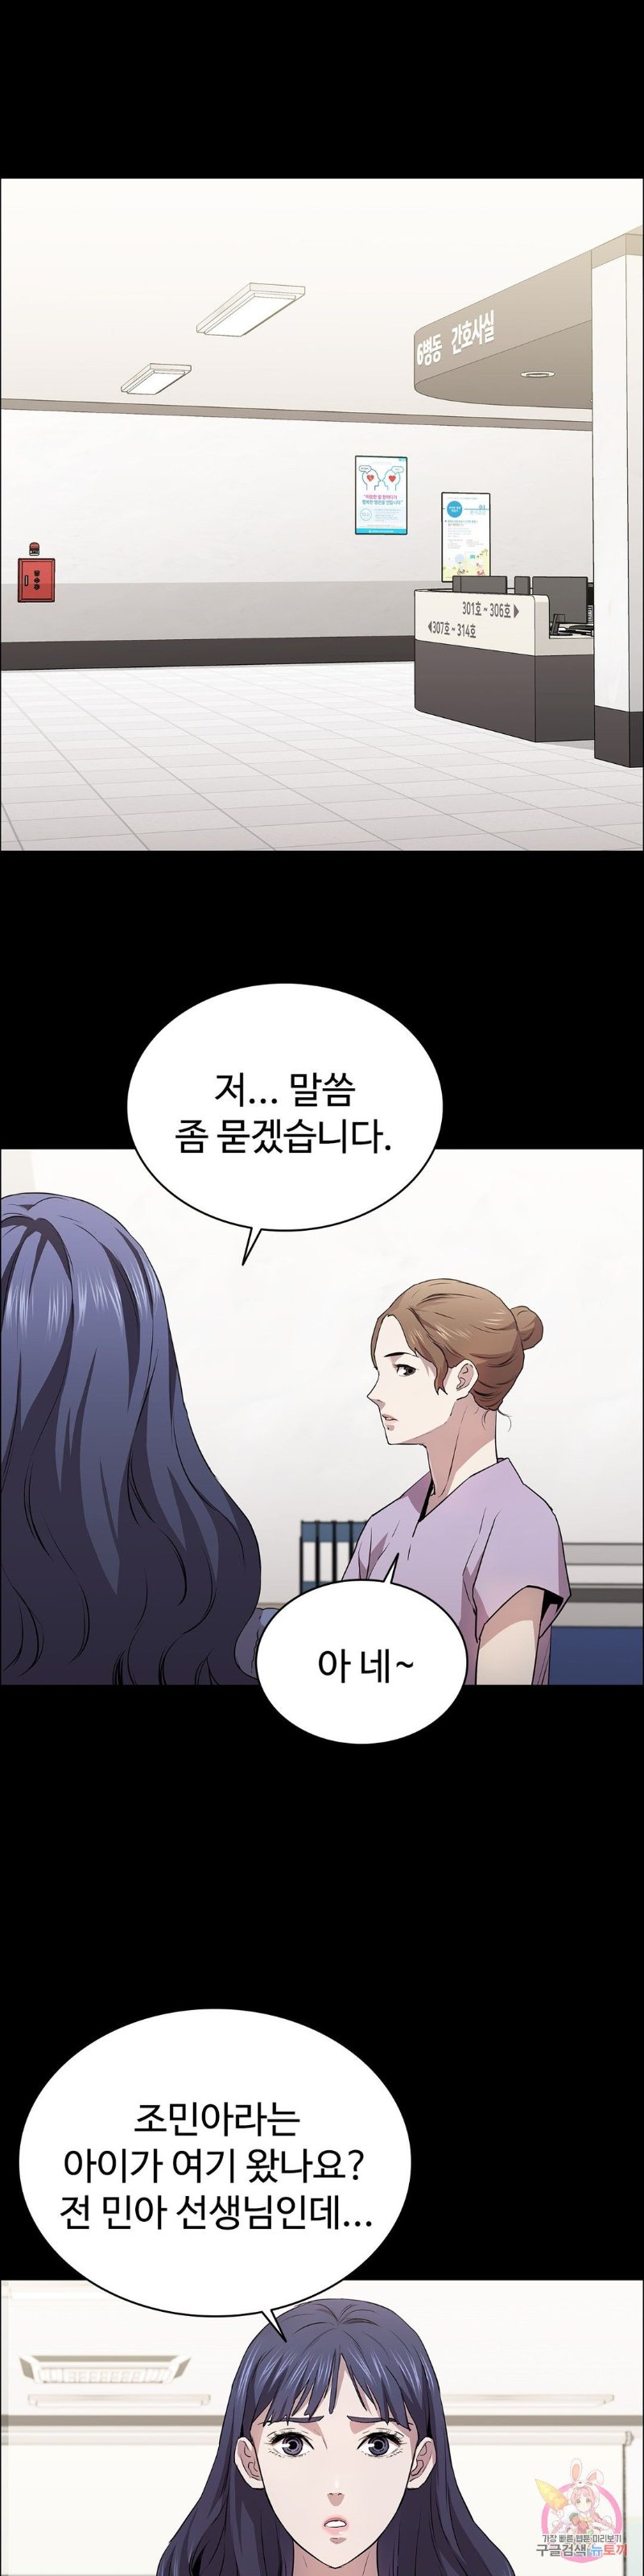 Innocence Beauty Raw - Chapter 13 Page 1